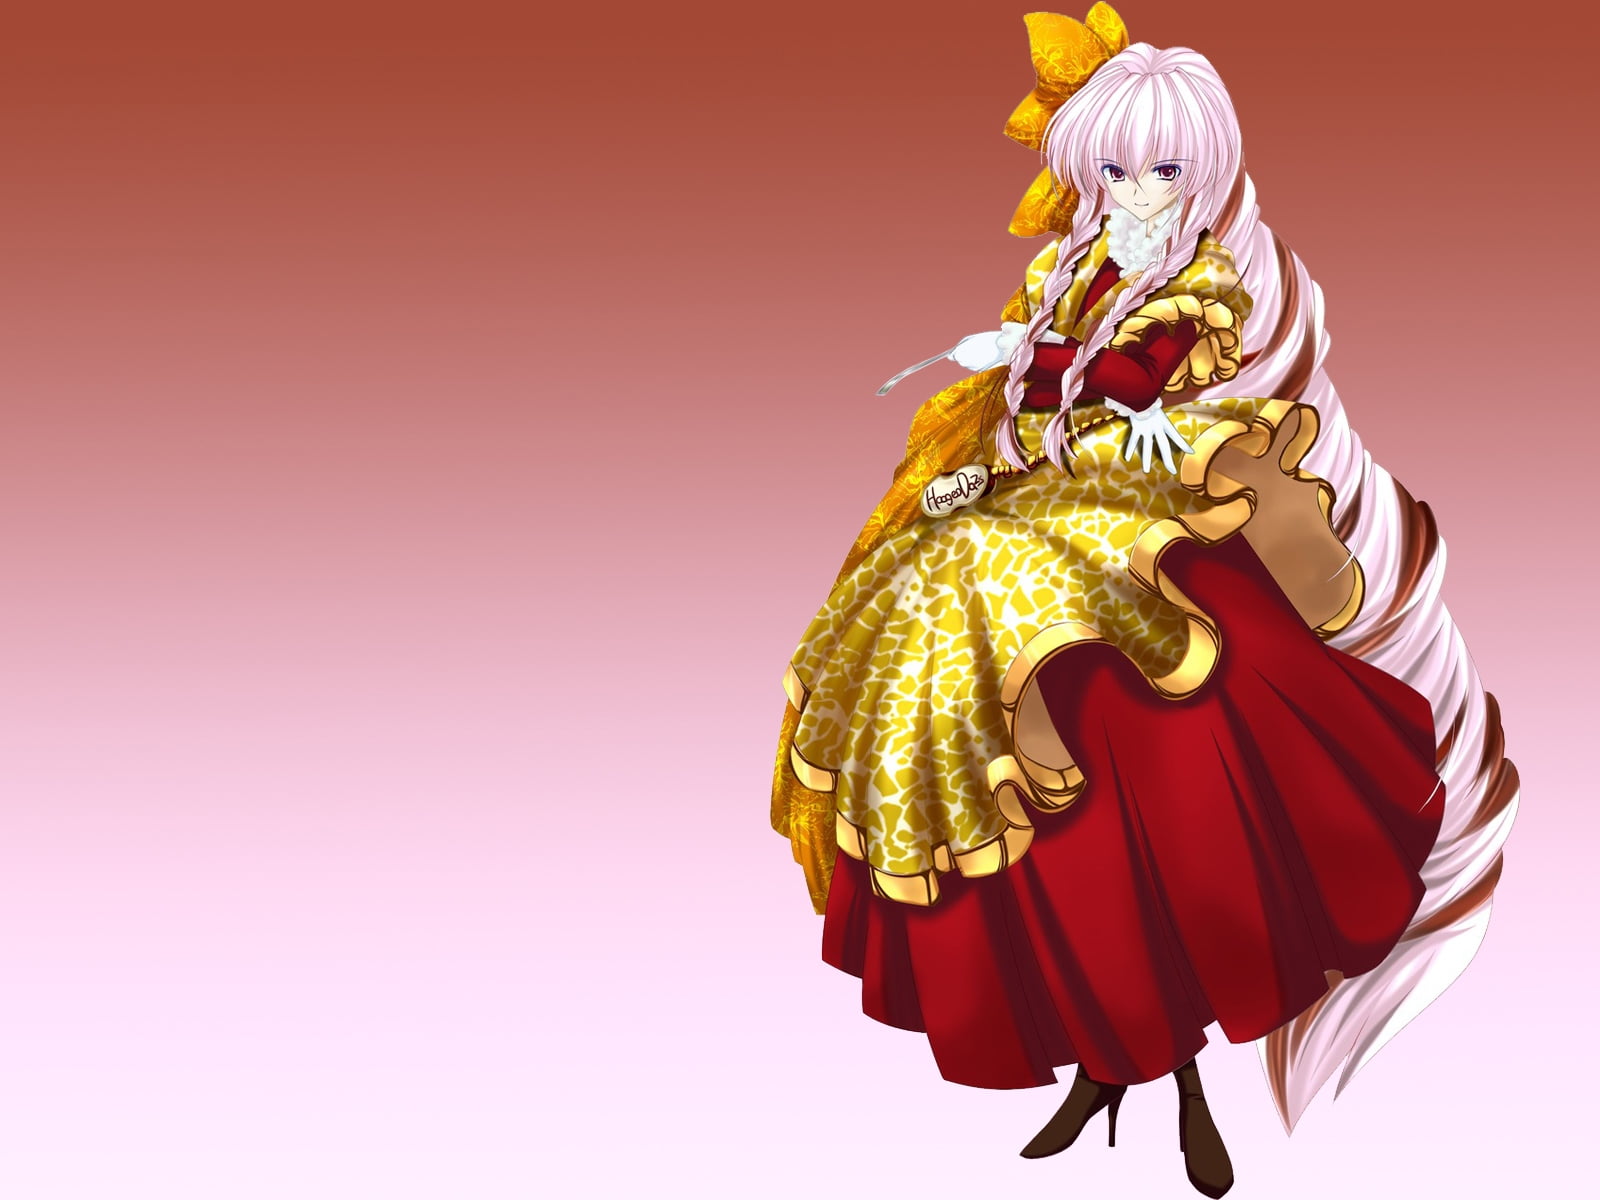 female anime character wearing red and yellow dress